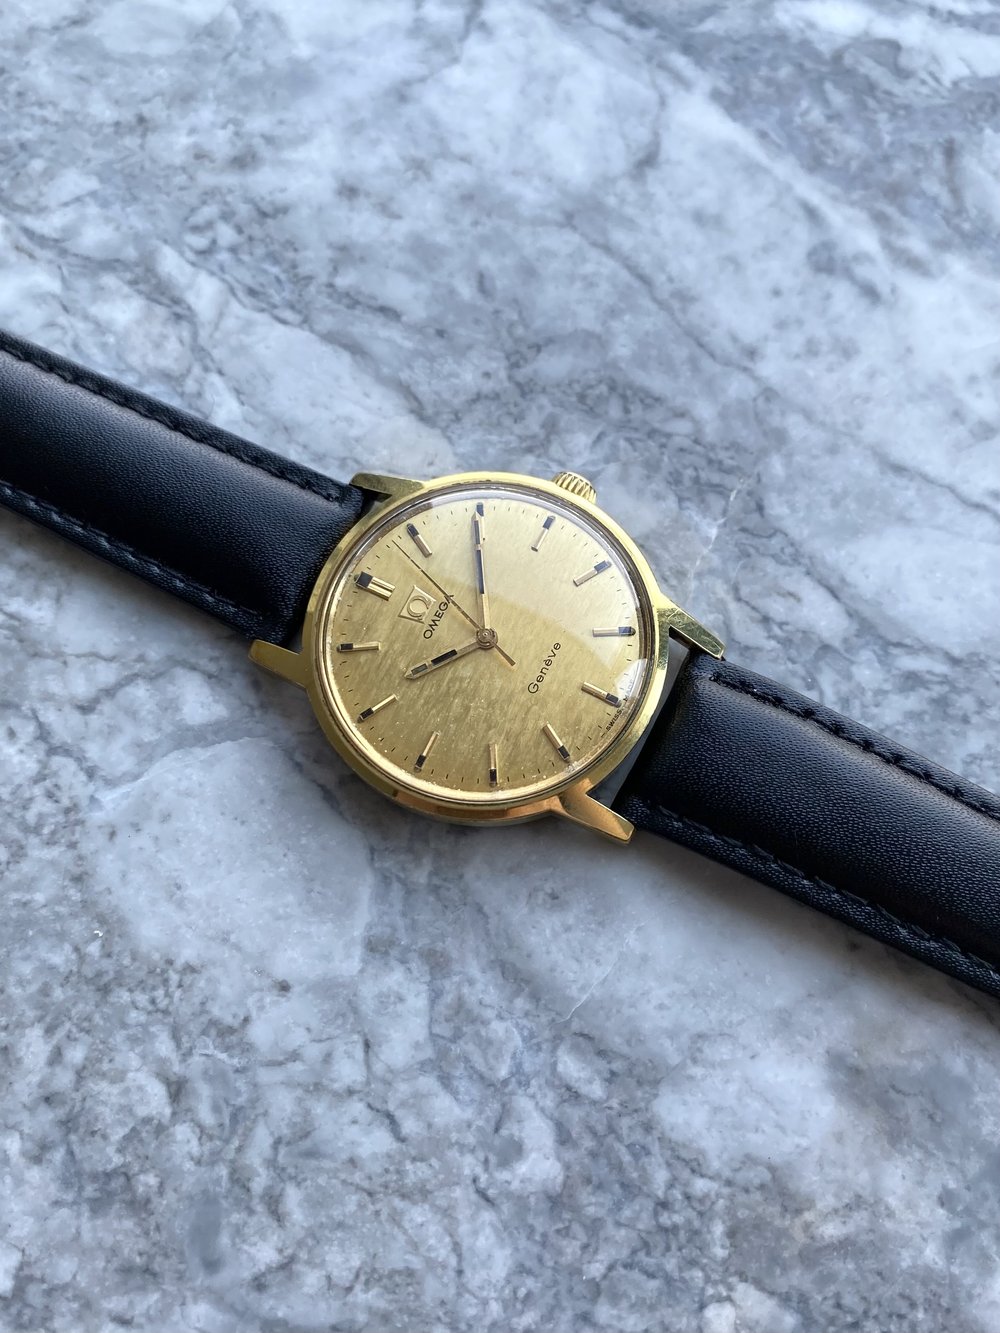 Omega Geneve - Champagne Mosaic Dial. — Danny's Vintage Watches